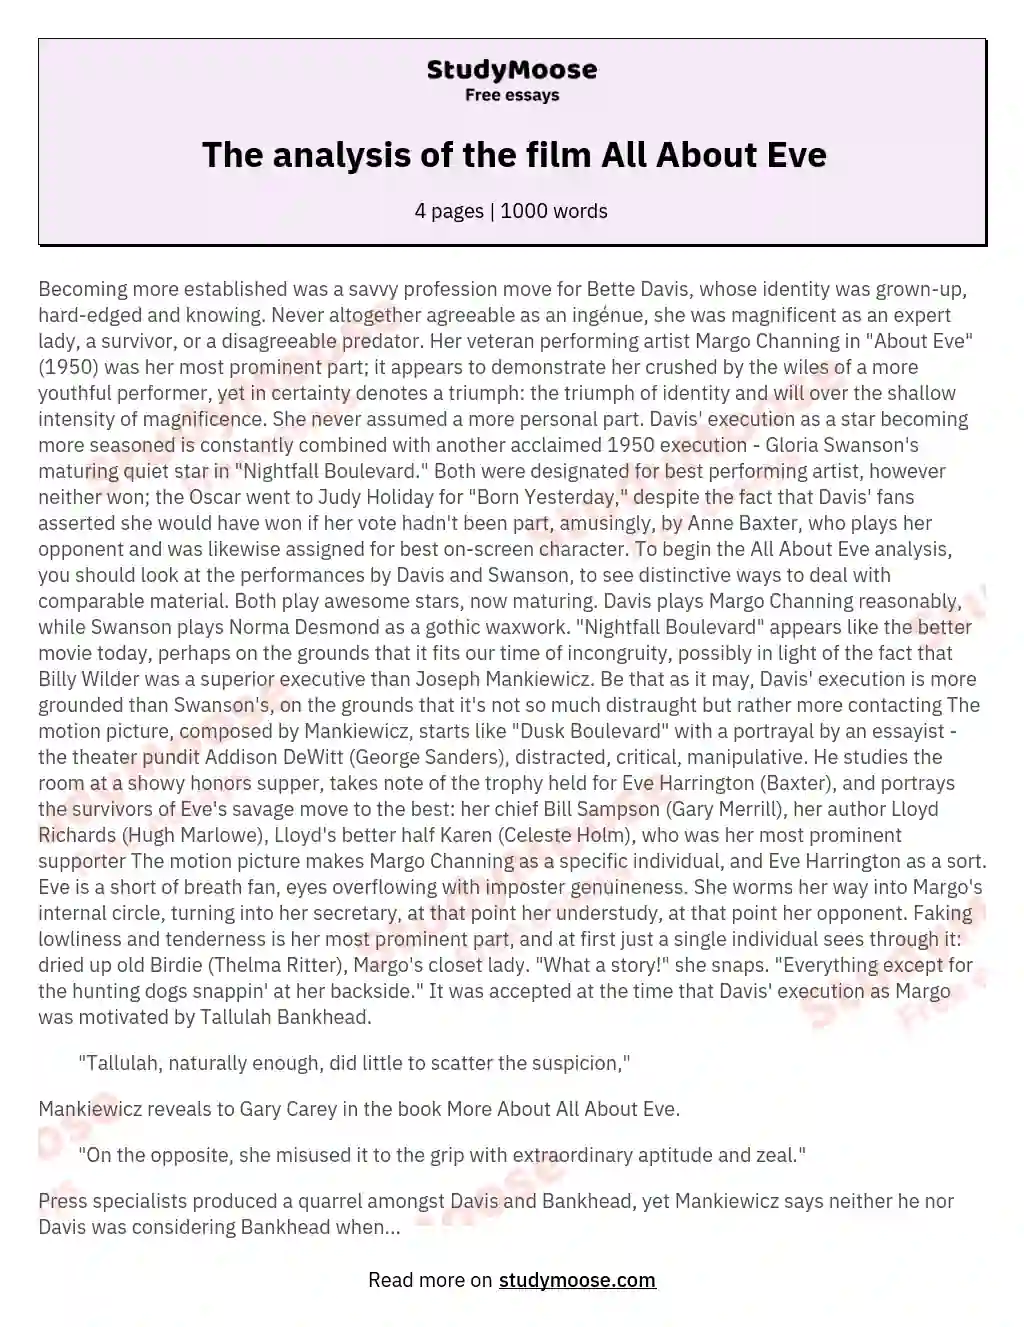 The analysis of the film All About Eve essay